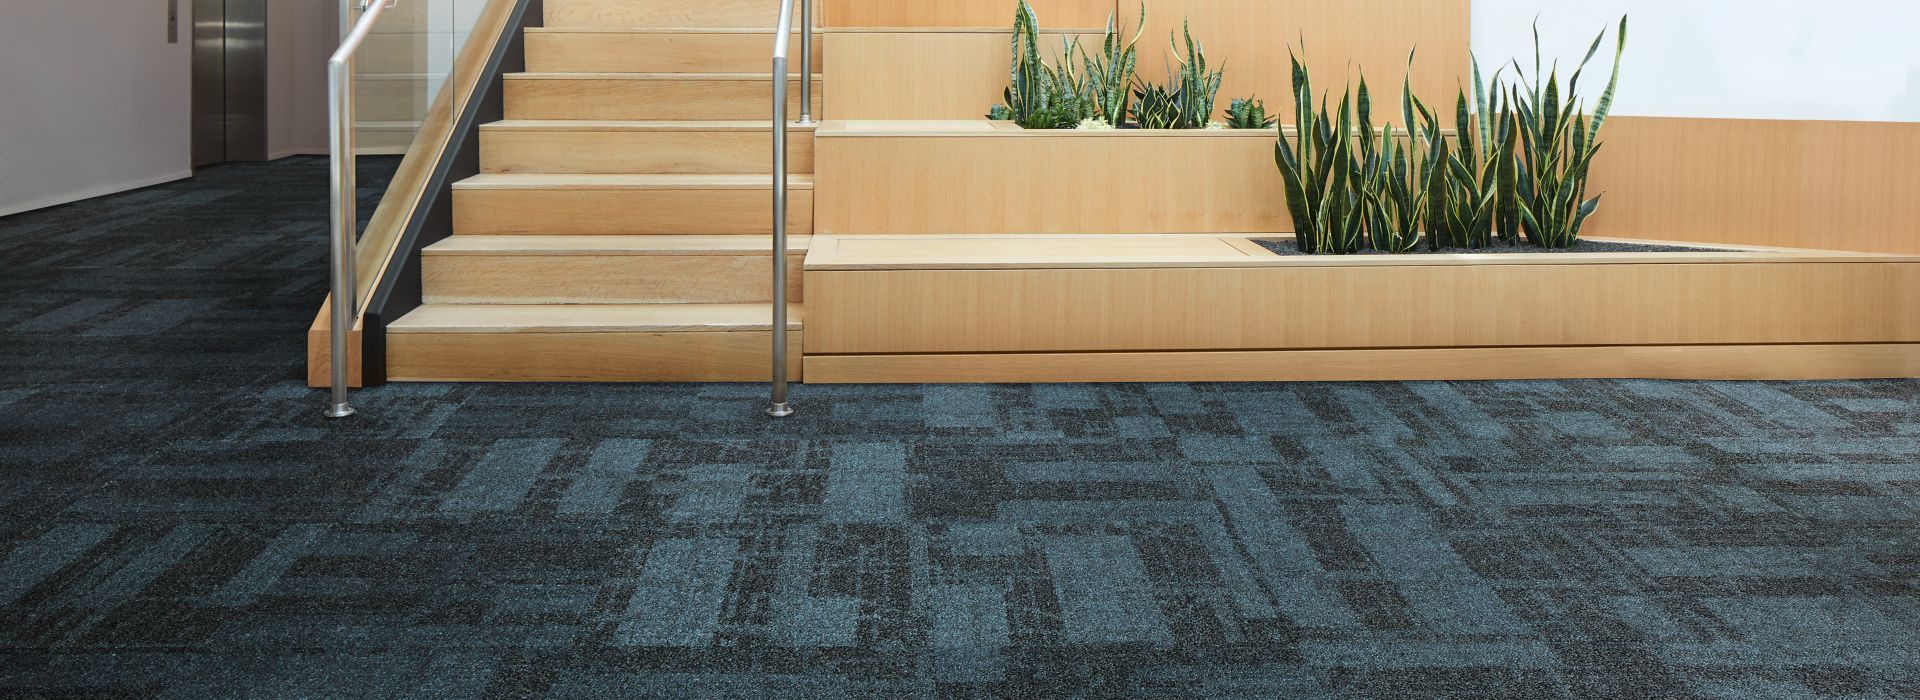 Interface Dynamic Duo carpet tile in entryway with stairs  image number 2